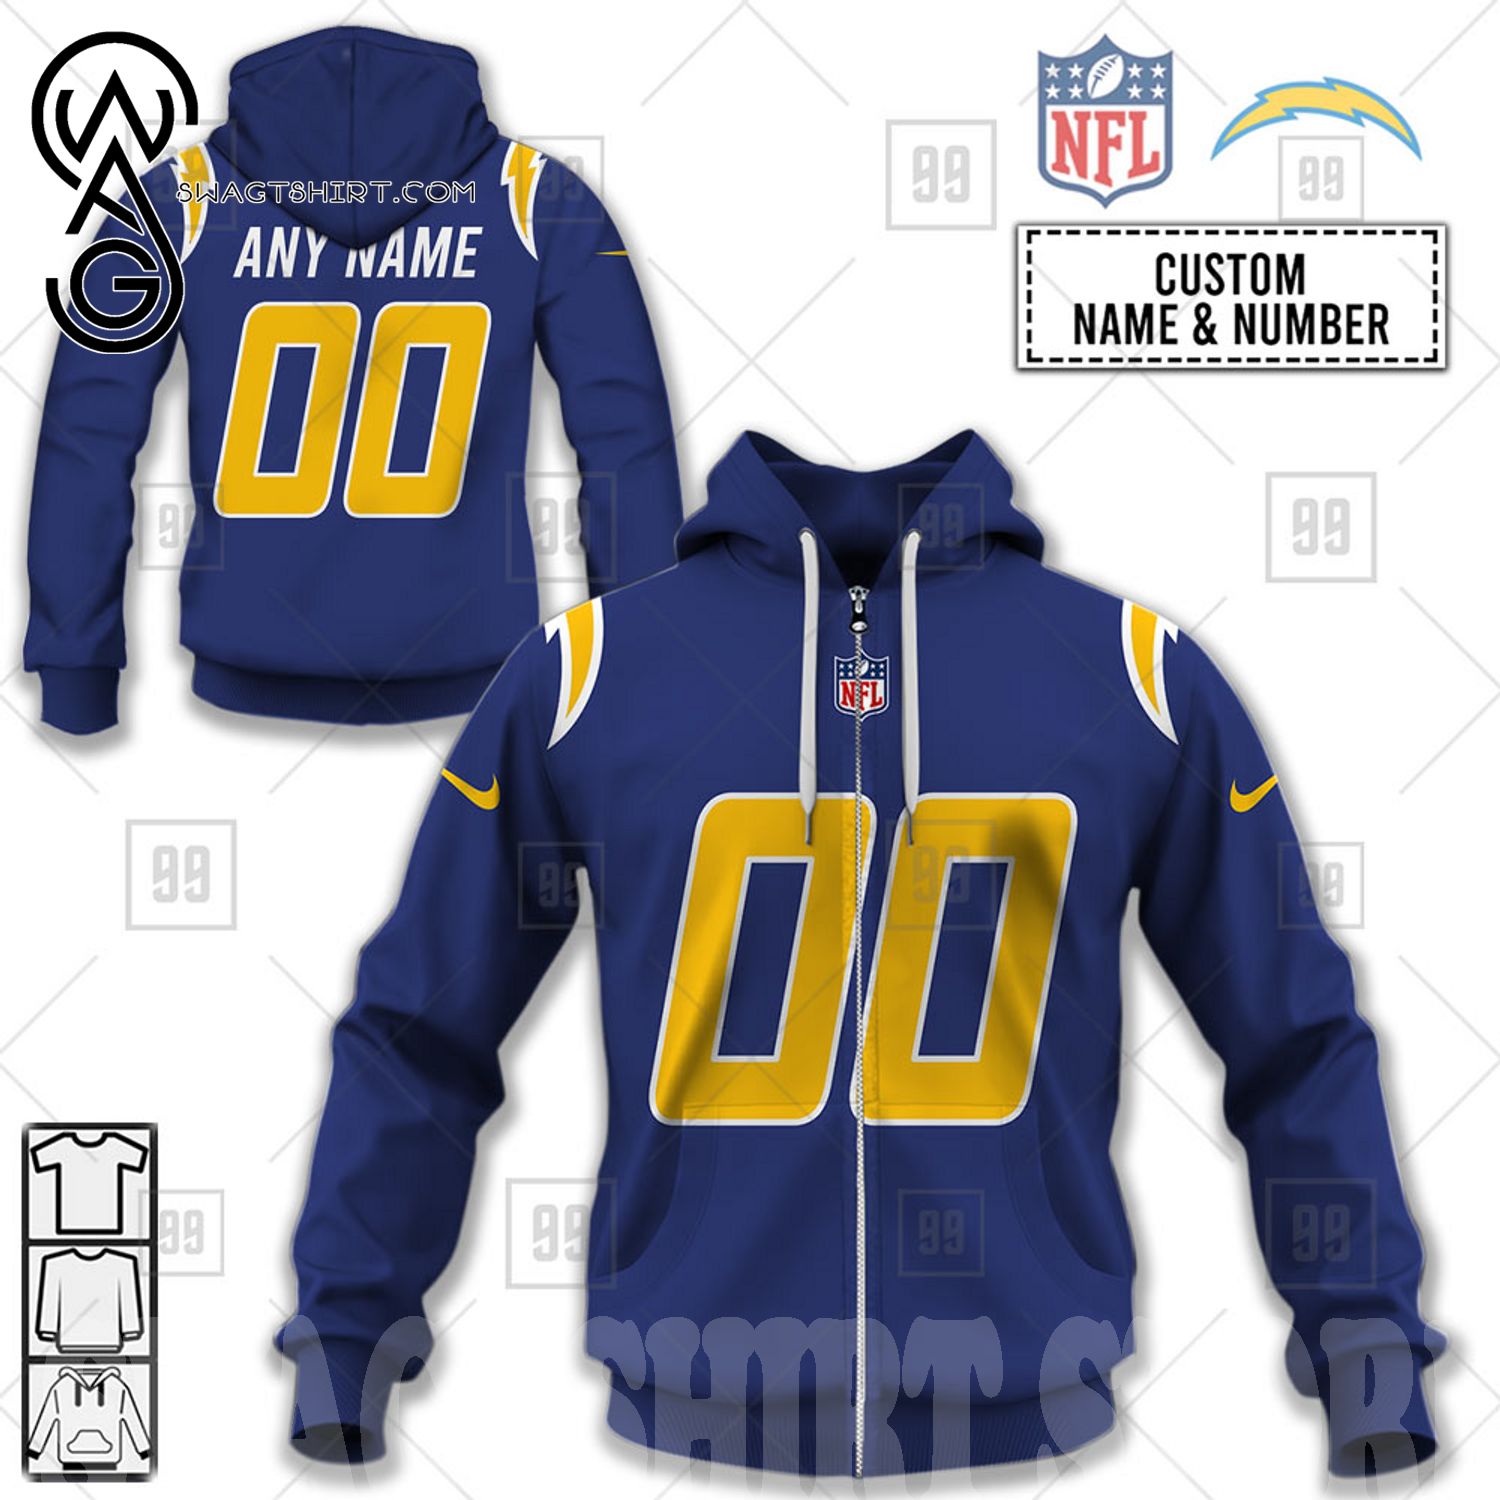 Best Selling Product] Personalized NFL Los Angeles Chargers Alternate Jersey  All Over Print Shirt